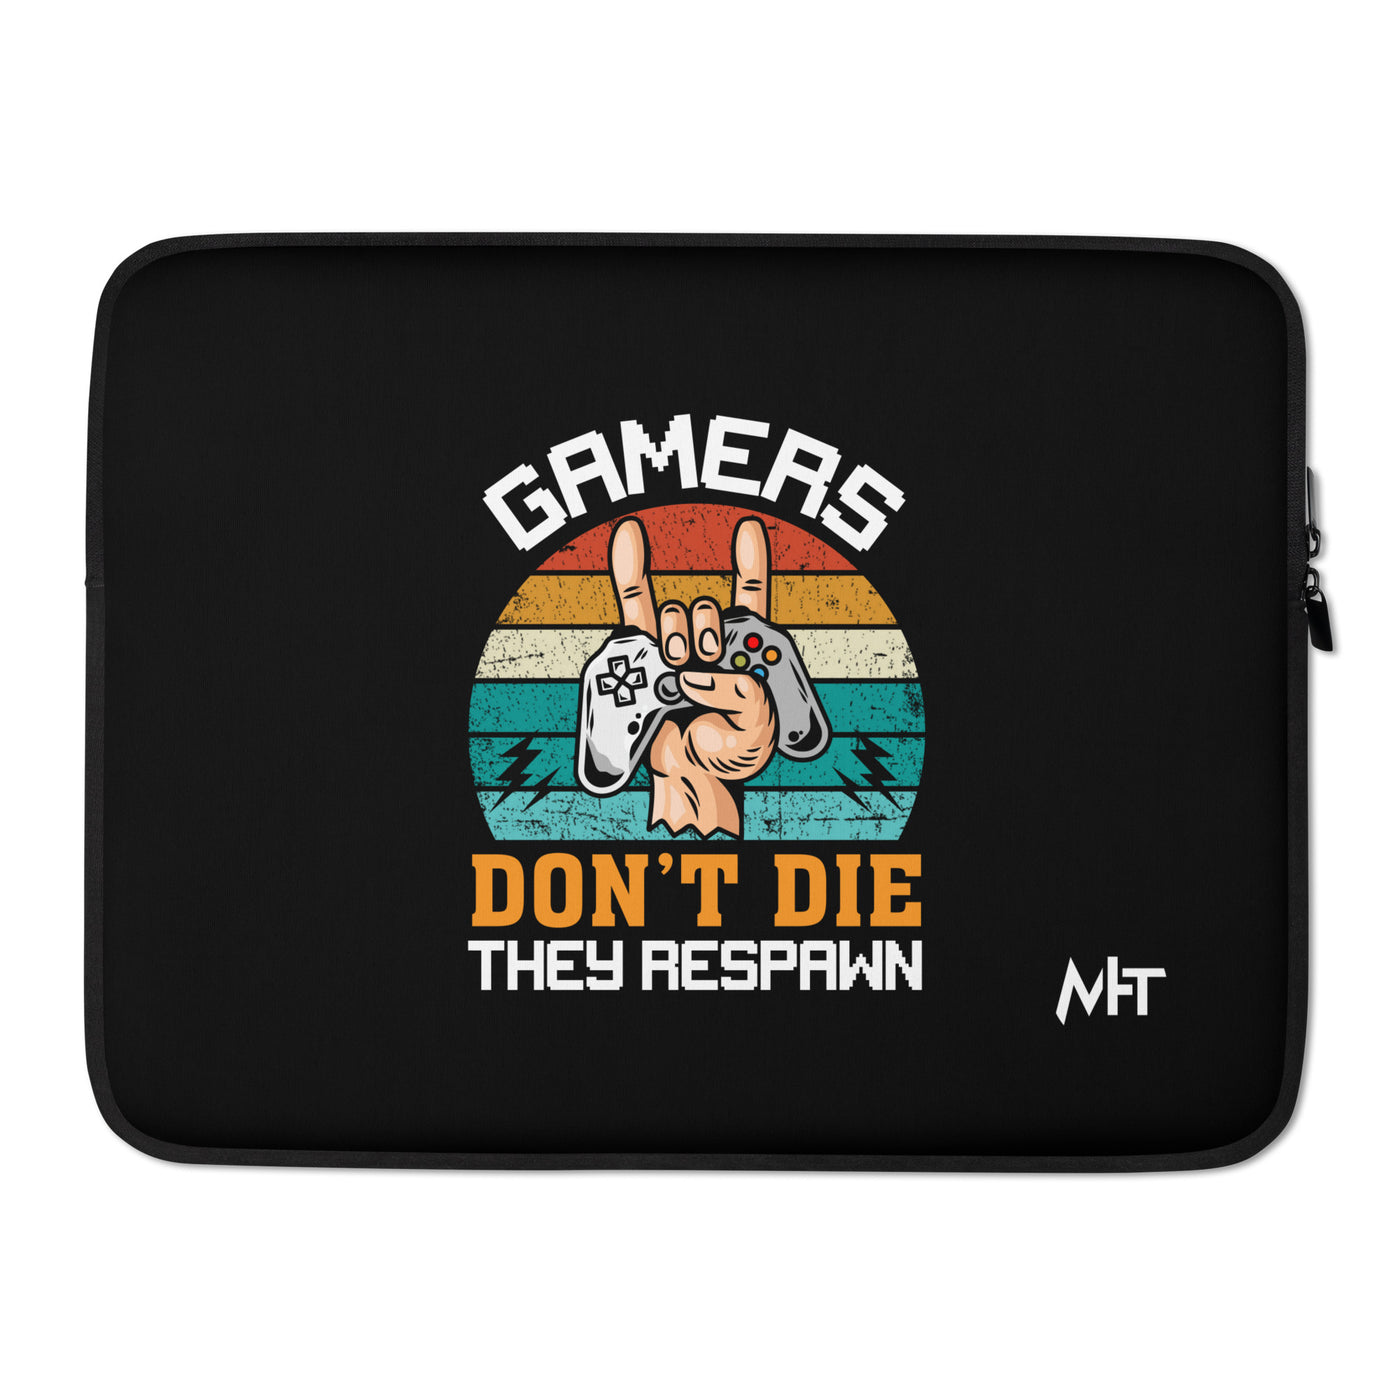 Gamers don't Die, they Respawn - Laptop Sleeve